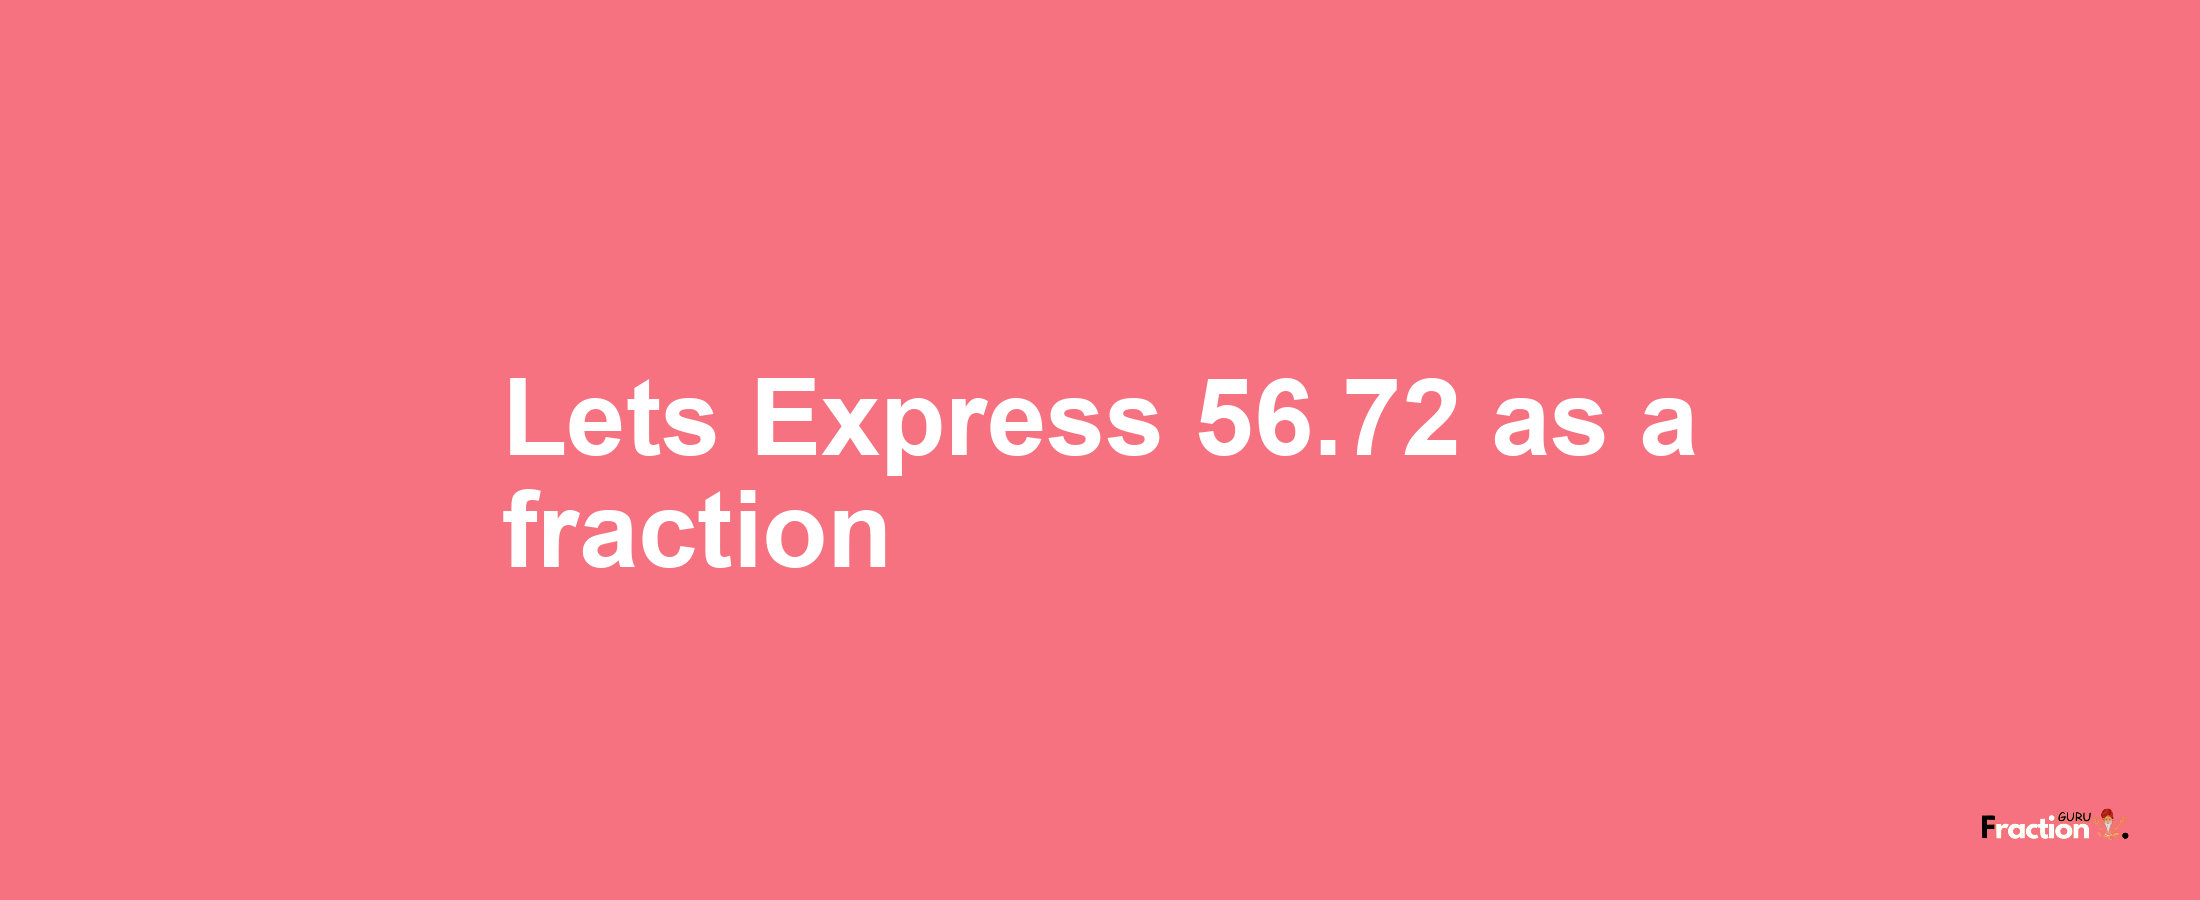 Lets Express 56.72 as afraction